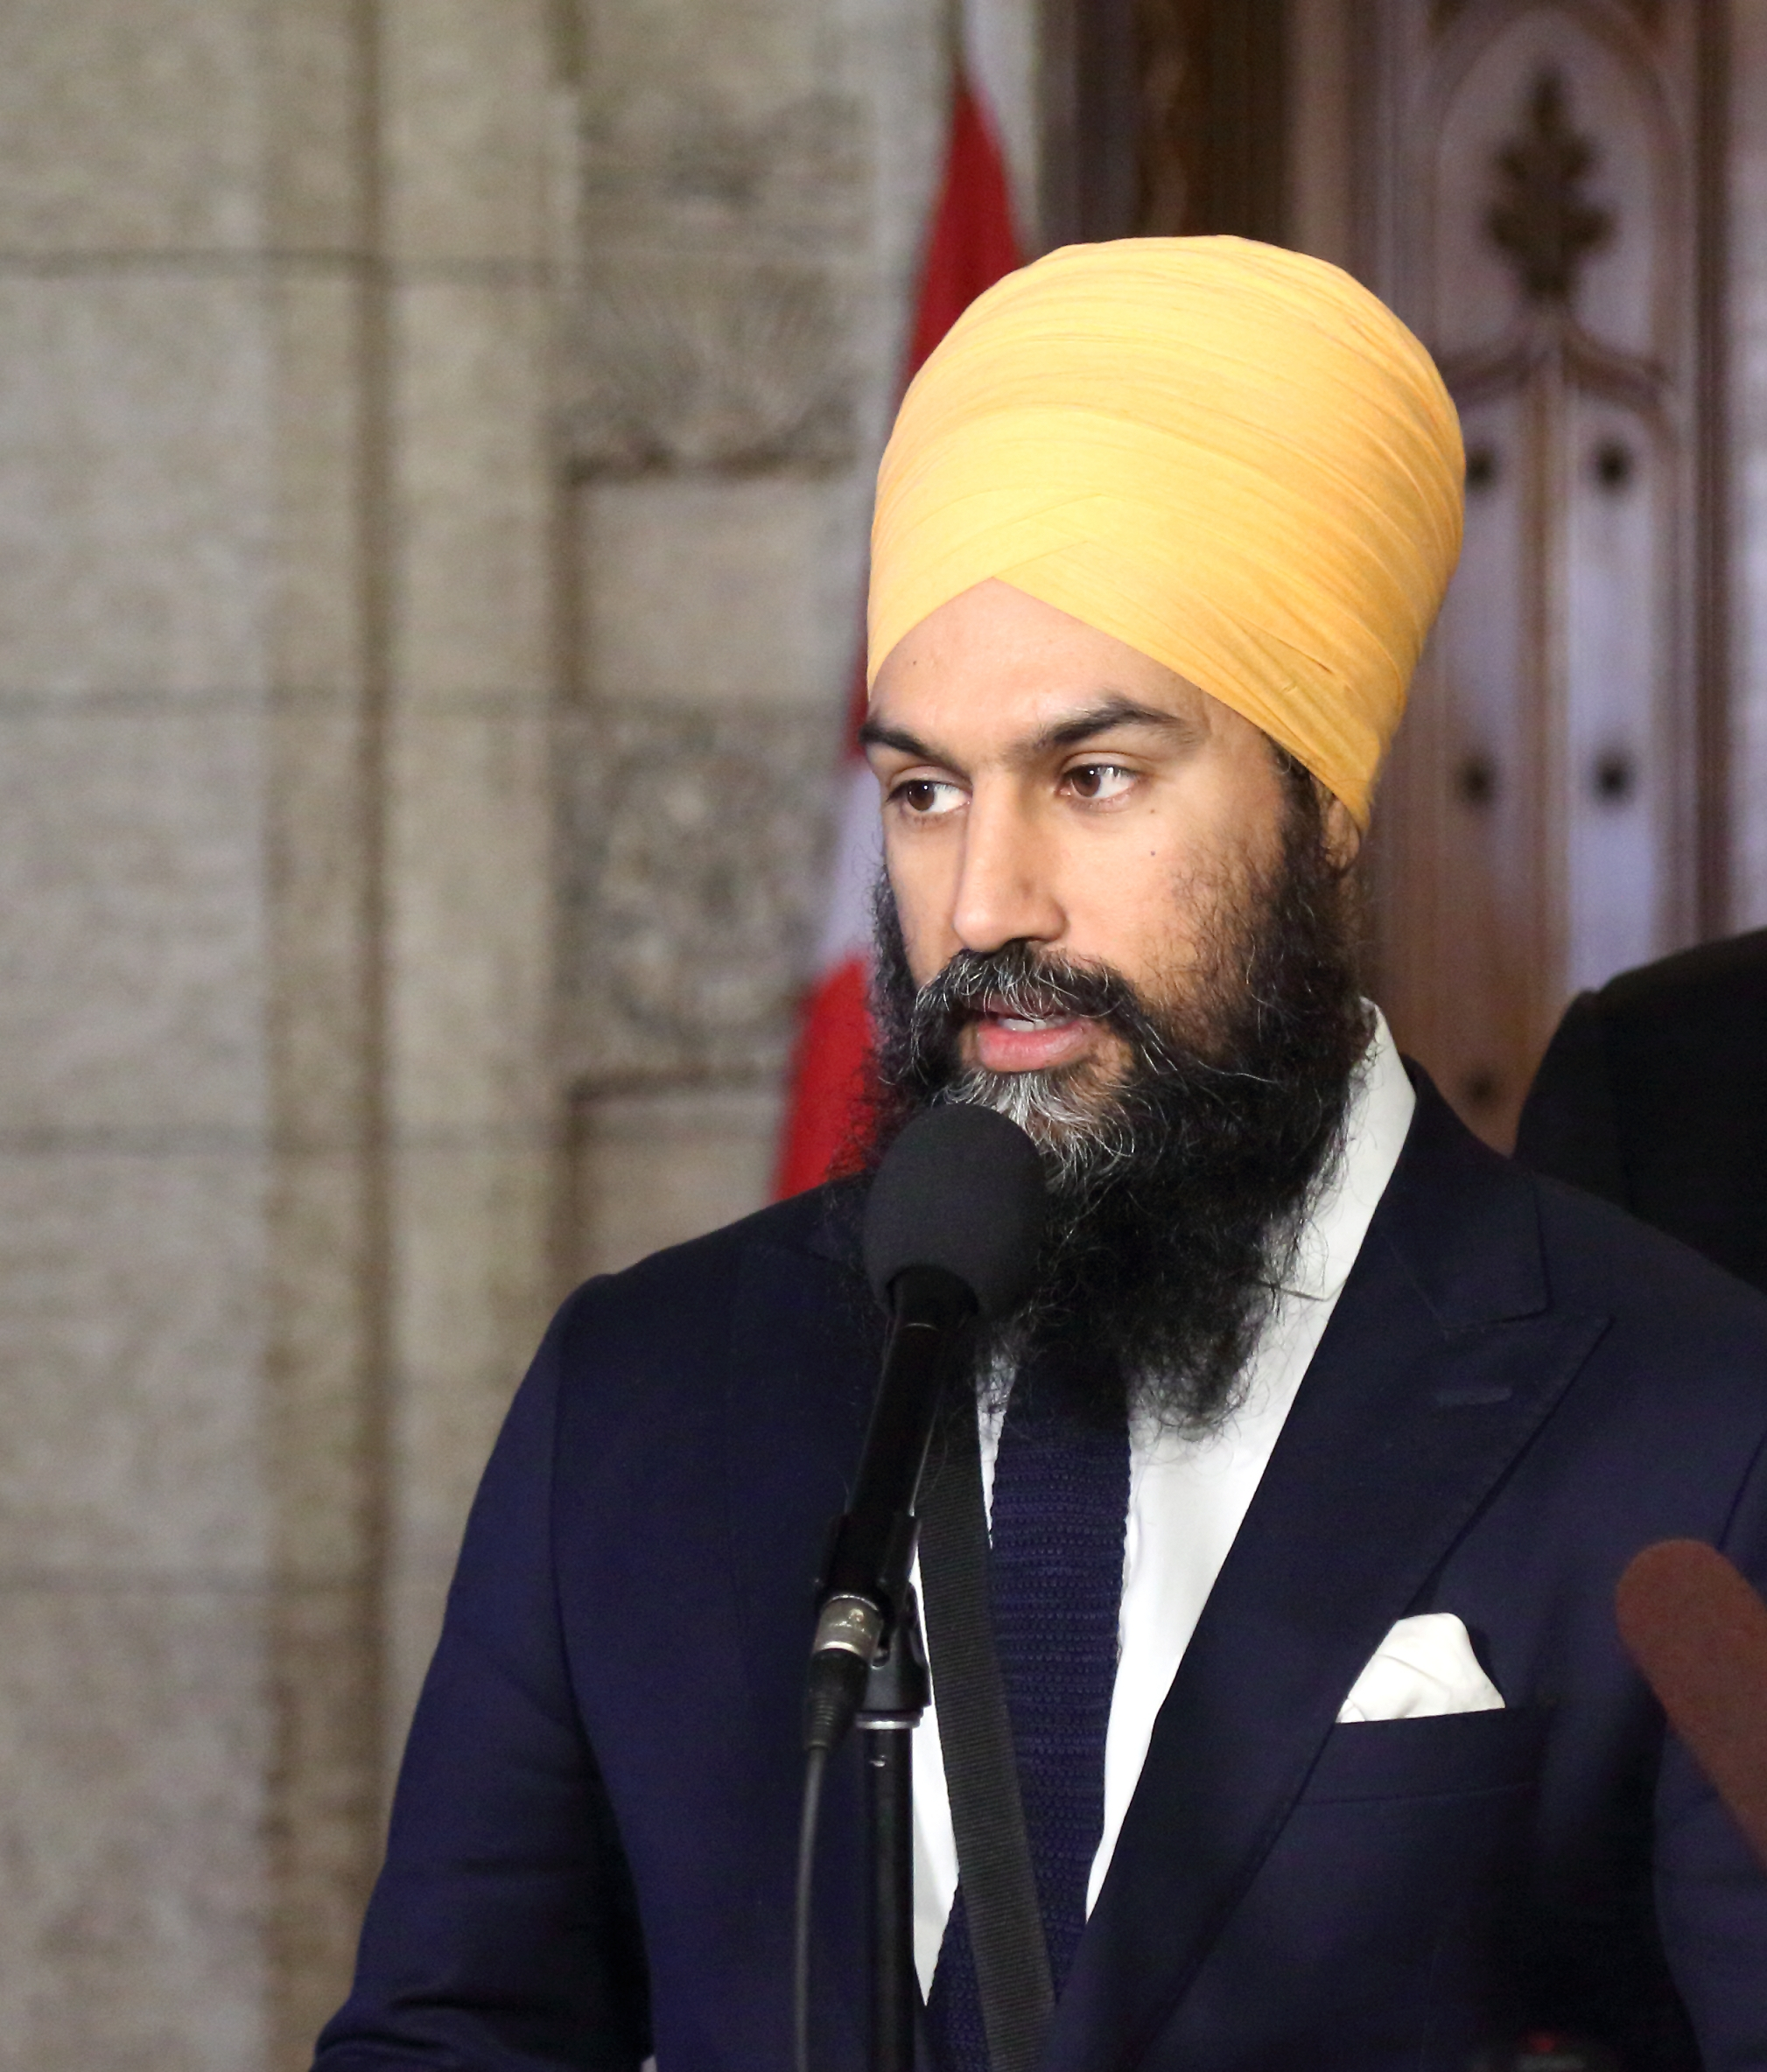 “More affordable housing to young Canadians and families” says NDP Leader Jagmeet Singh